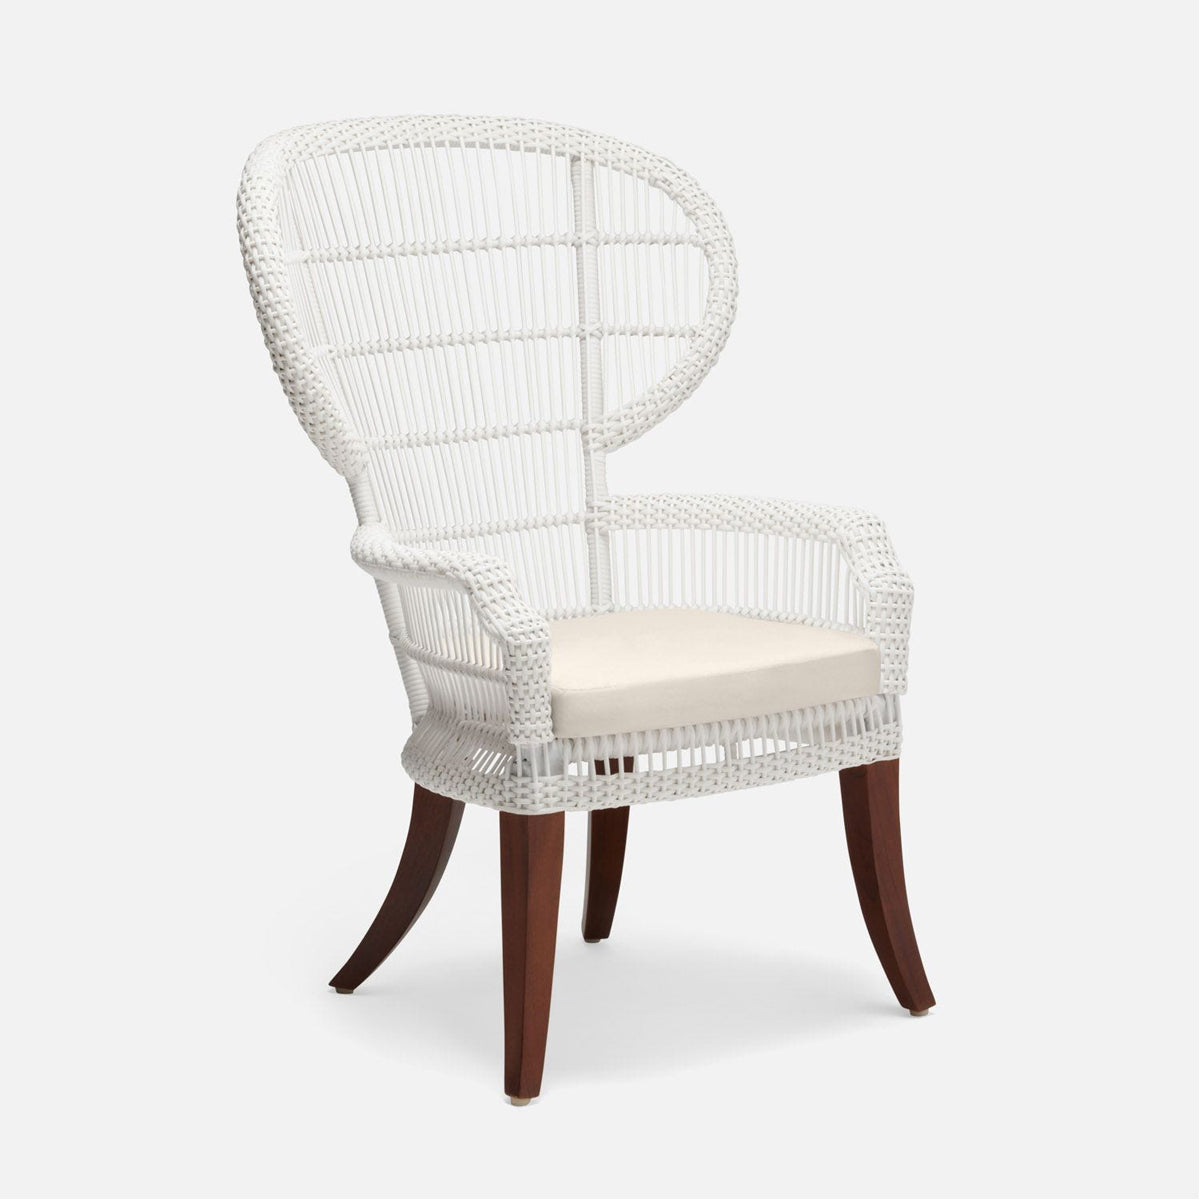 Made Goods Aurora Woven Wingback Outdoor Dining Chair in Garonne Leather